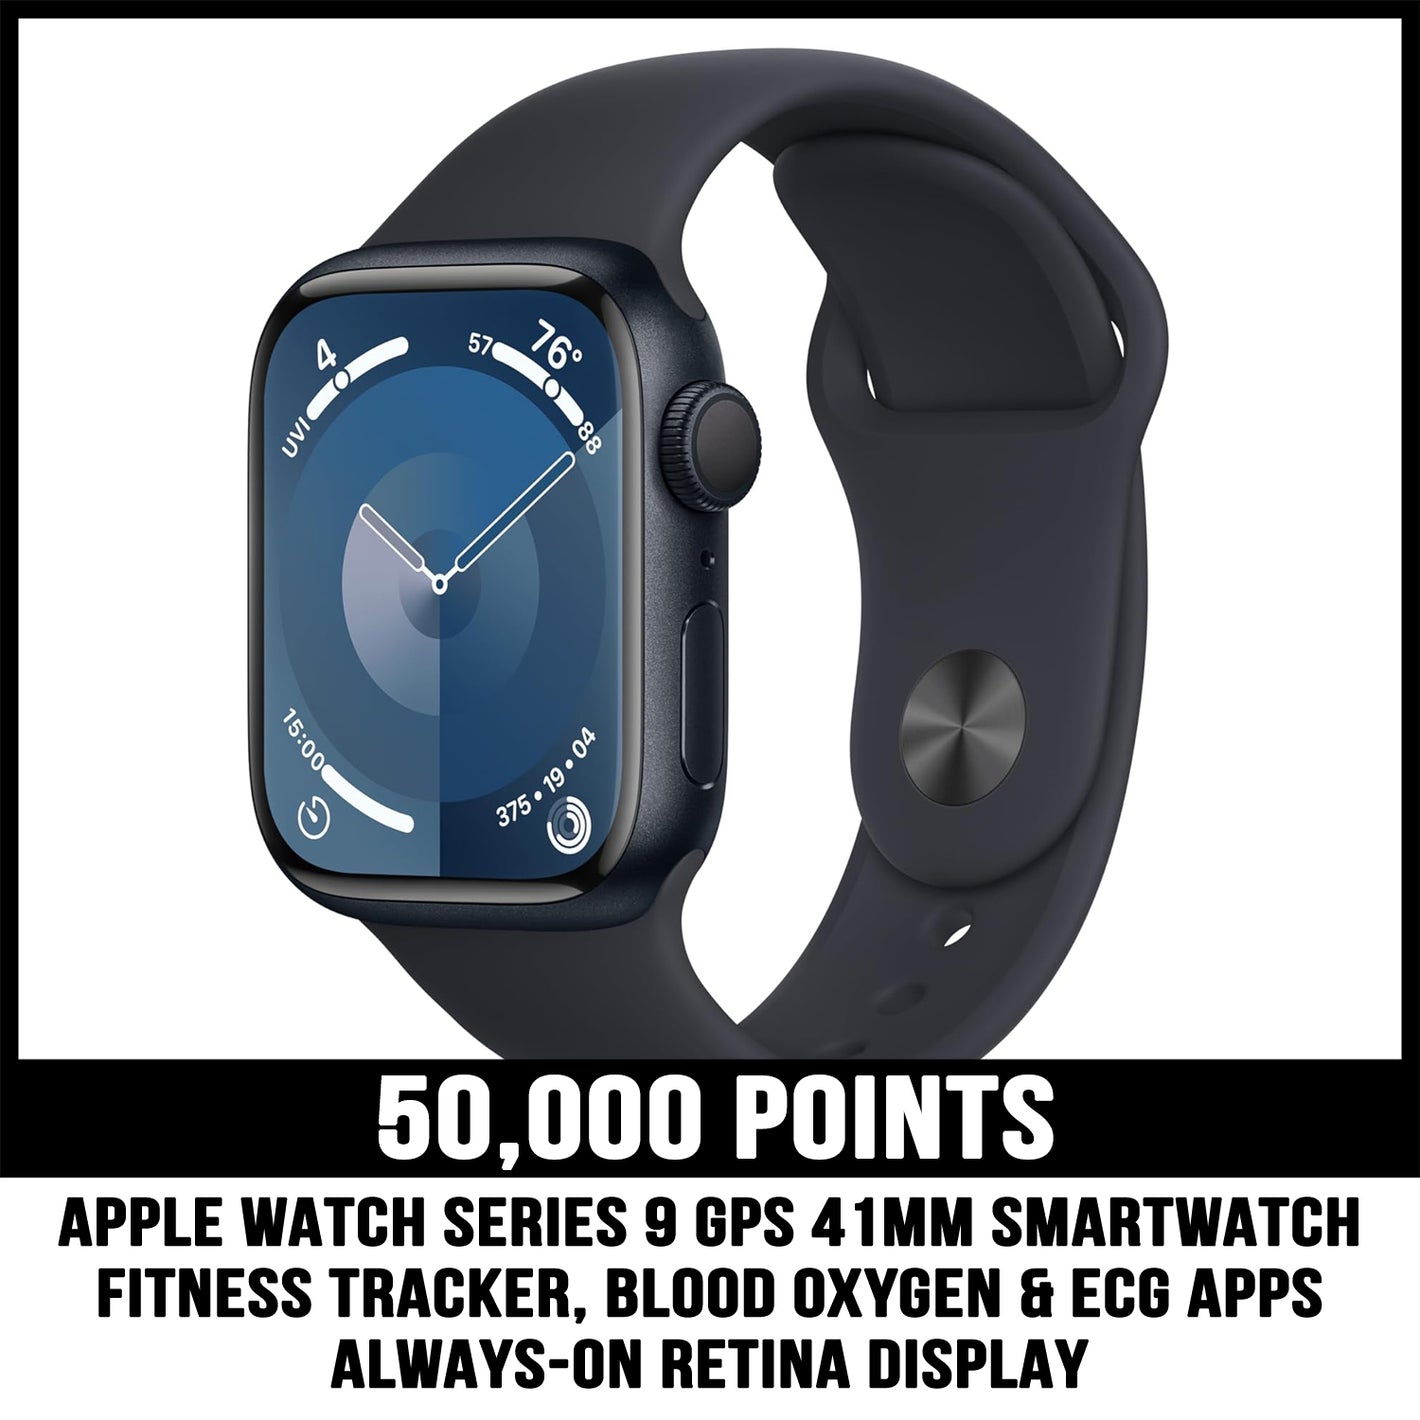 Apple Watch Series 9 prize for 50000 points